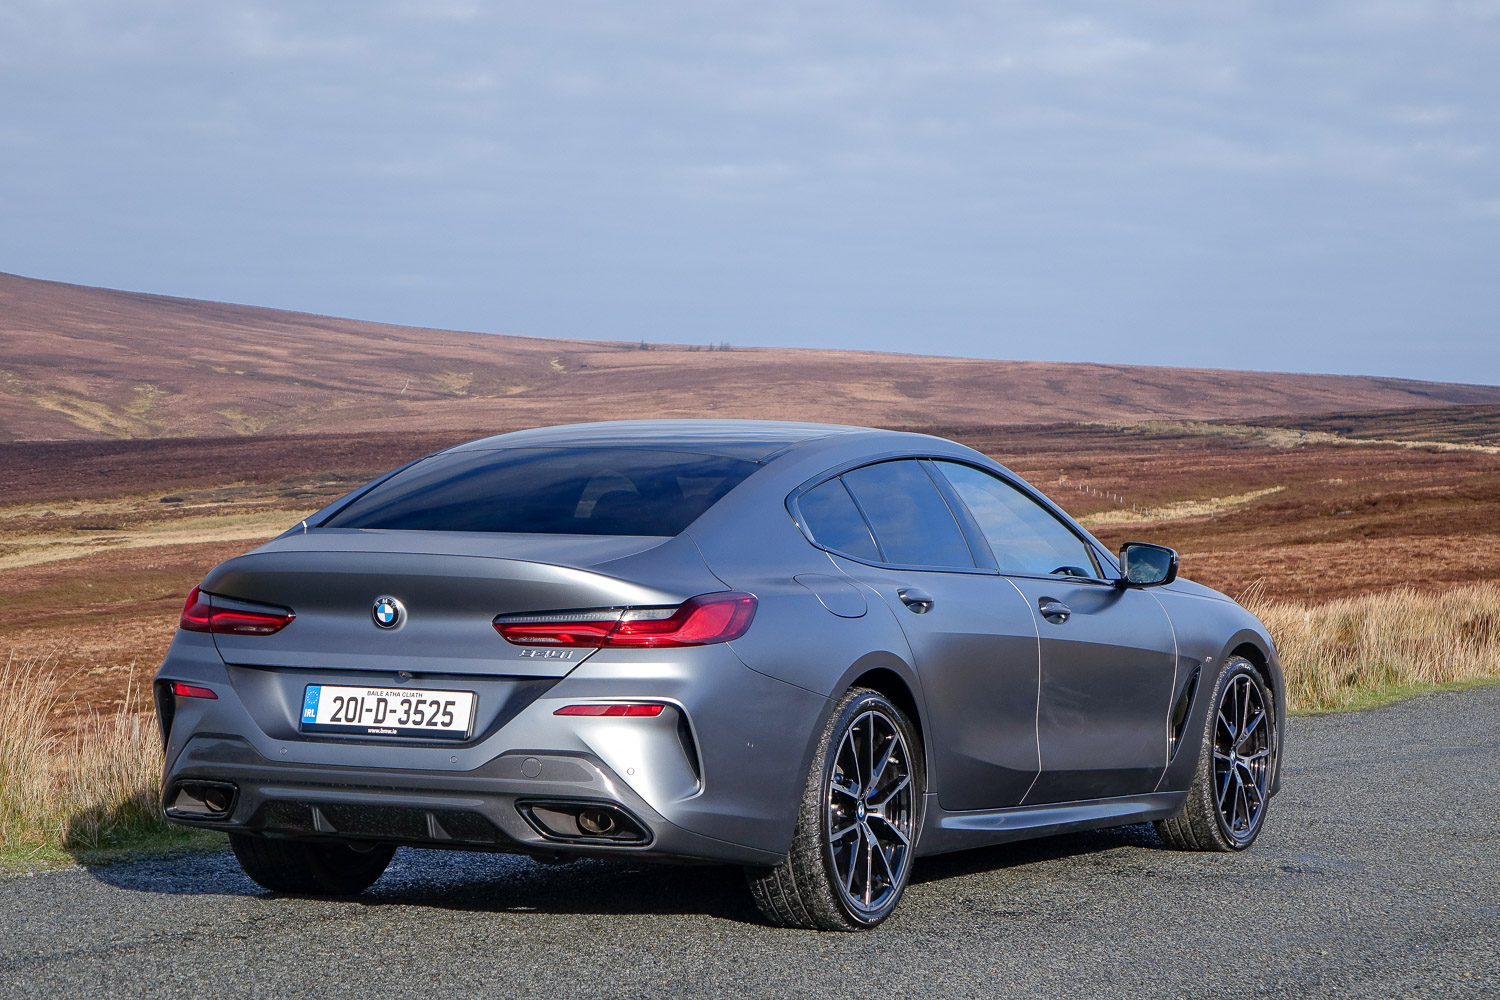 BMW 840i Gran Coupe (2020) | Reviews | Complete Car